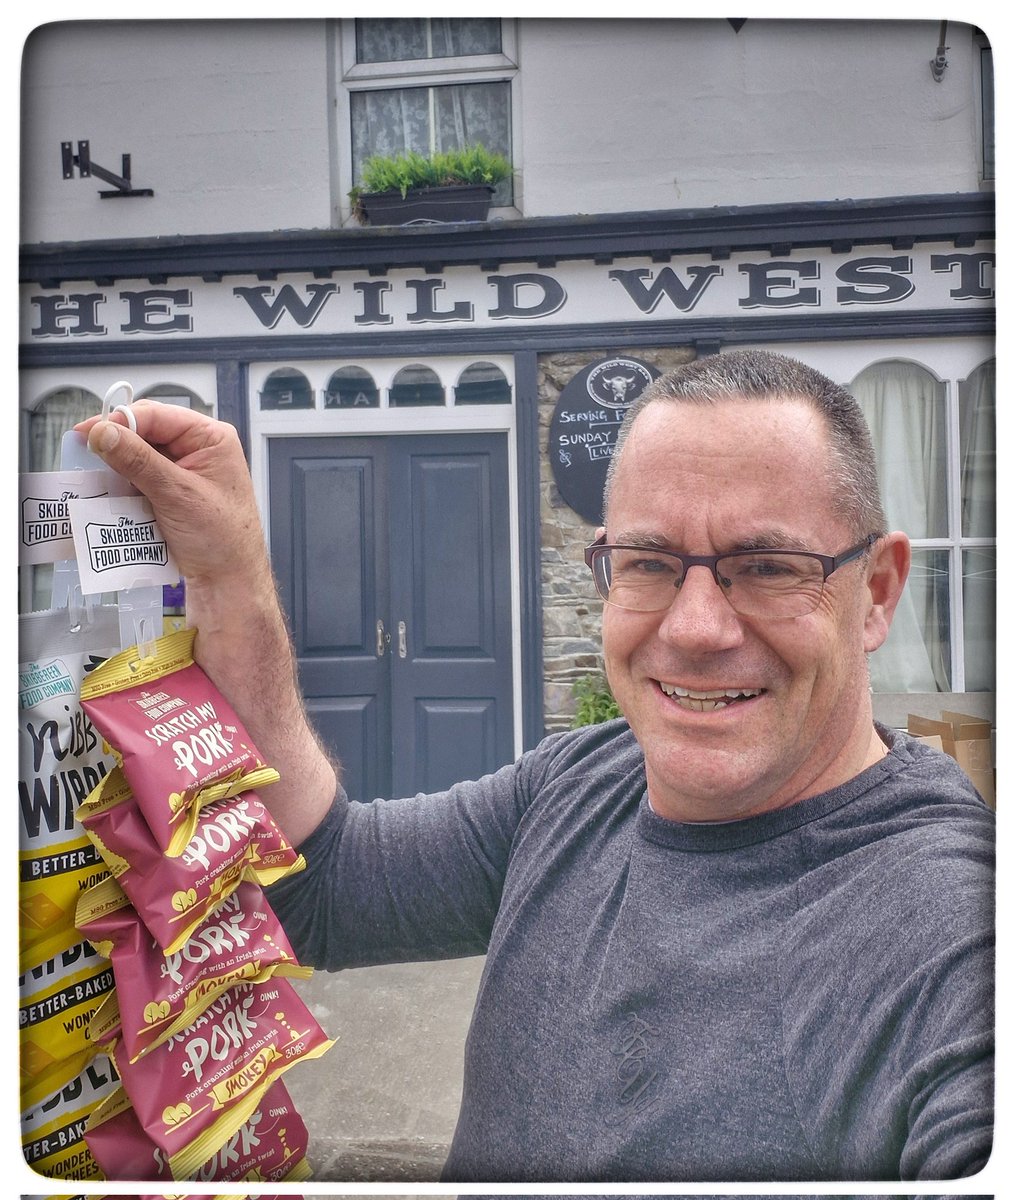 **In Goleen In A Spaghetti Western** Thank you so much to the team at @TheWildWestBar for stocking Scratch My Pork & Nibbly Wibbly's. 🐽 🌽 Yet again, thank you to the local support. @corkfoodie @SouthoftheN71 @theskibeagle @TourismHospDept @WhatsOnWestCork @SouthernStarIRL